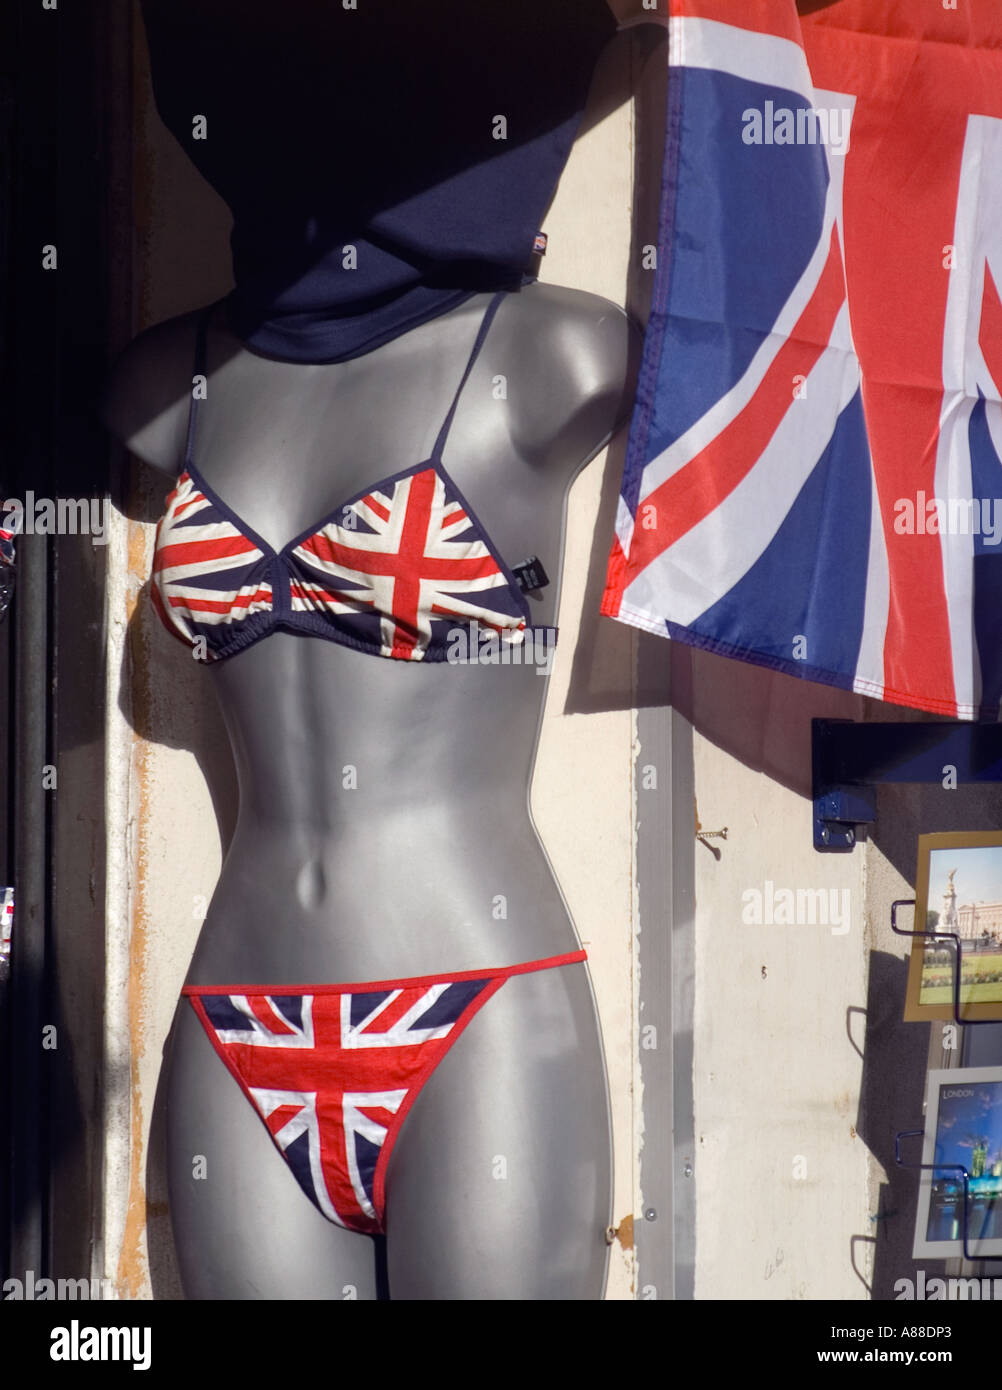 Union Jack bra and knickers on sale in souvenir shop in Oxford